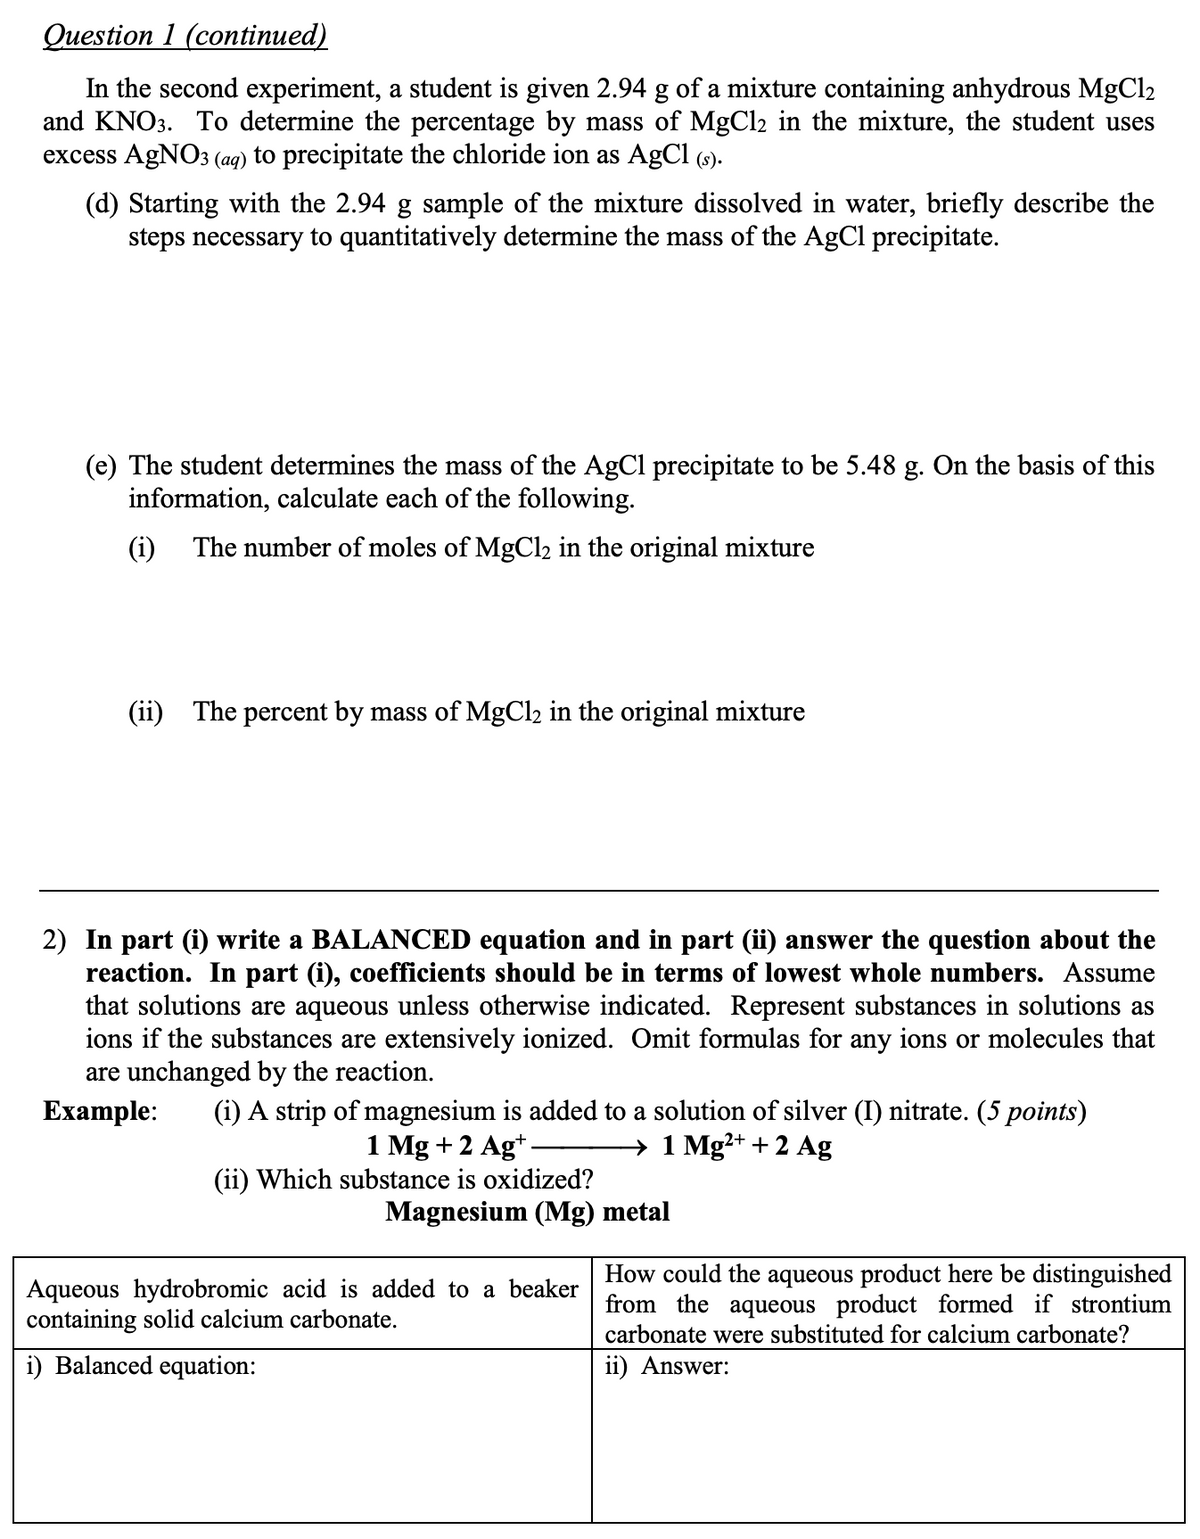 Question 1 (continued)
In the second experiment, a student is given 2.94 g of a mixture containing anhydrous MgCl2
and KNO3. To determine the percentage by mass of MgCl2 in the mixture, the student uses
excess AgNO3 (ag) to precipitate the chloride ion as AgCl (9).
(d) Starting with the 2.94 g sample of the mixture dissolved in water, briefly describe the
steps necessary to quantitatively determine the mass of the AgCl precipitate.
(e) The student determines the mass of the AgCl precipitate to be 5.48 g. On the basis of this
information, calculate each of the following.
(i)
The number of moles of MgCl2 in the original mixture
(ii) The percent by mass of MgCl2 in the original mixture
2) In part (i) write a BALANCED equation and in part (ii) answer the question about the
reaction. In part (i), coefficients should be in terms of lowest whole numbers. Assume
that solutions are aqueous unless otherwise indicated. Represent substances in solutions as
ions if the substances are extensively ionized. Omit formulas for any ions or molecules that
are unchanged by the reaction.
Еxample:
(i) A strip of magnesium is added to a solution of silver (I) nitrate. (5 points)
→ 1 Mg²+ + 2 Ag
1 Mg +2 Ag*-
(ii) Which substance is oxidized?
Magnesium (Mg) metal
Aqueous hydrobromic acid is added to a beaker
containing solid calcium carbonate.
How could the aqueous product here be distinguished
from the aqueous product formed if strontium
carbonate were substituted for calcium carbonate?
i) Balanced equation:
ii) Answer:
